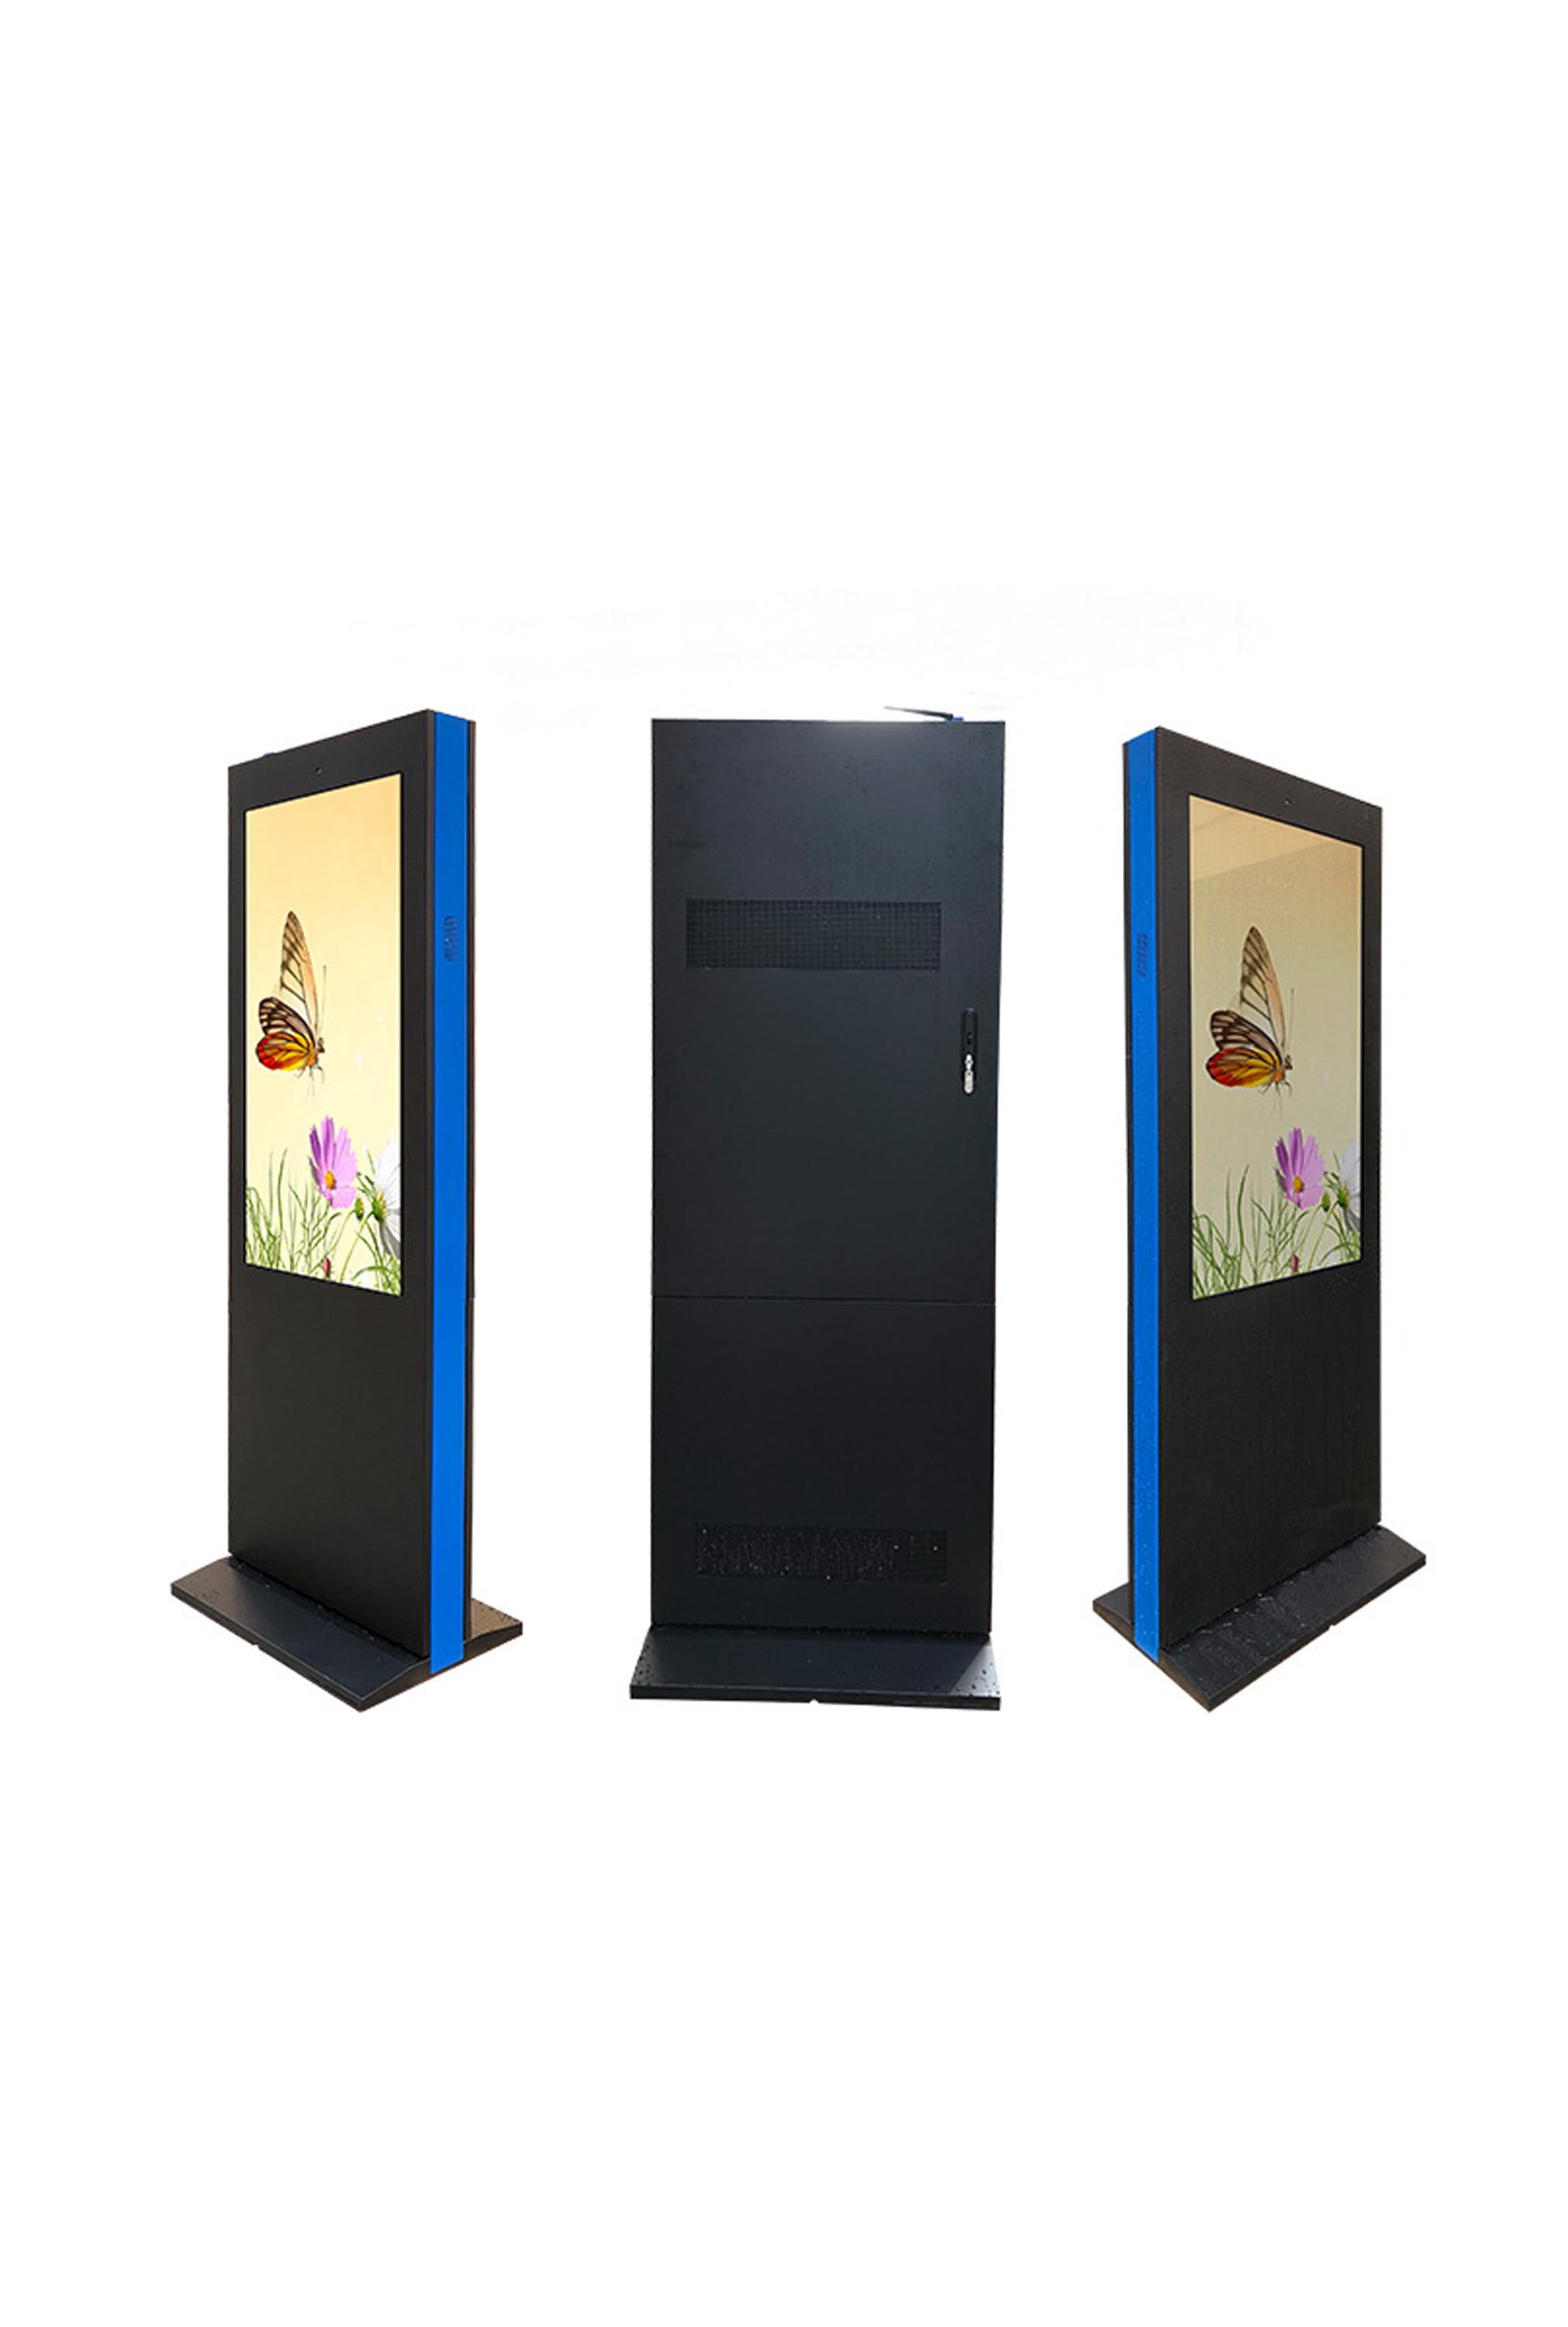 Standalone Outdoor Digital Signage